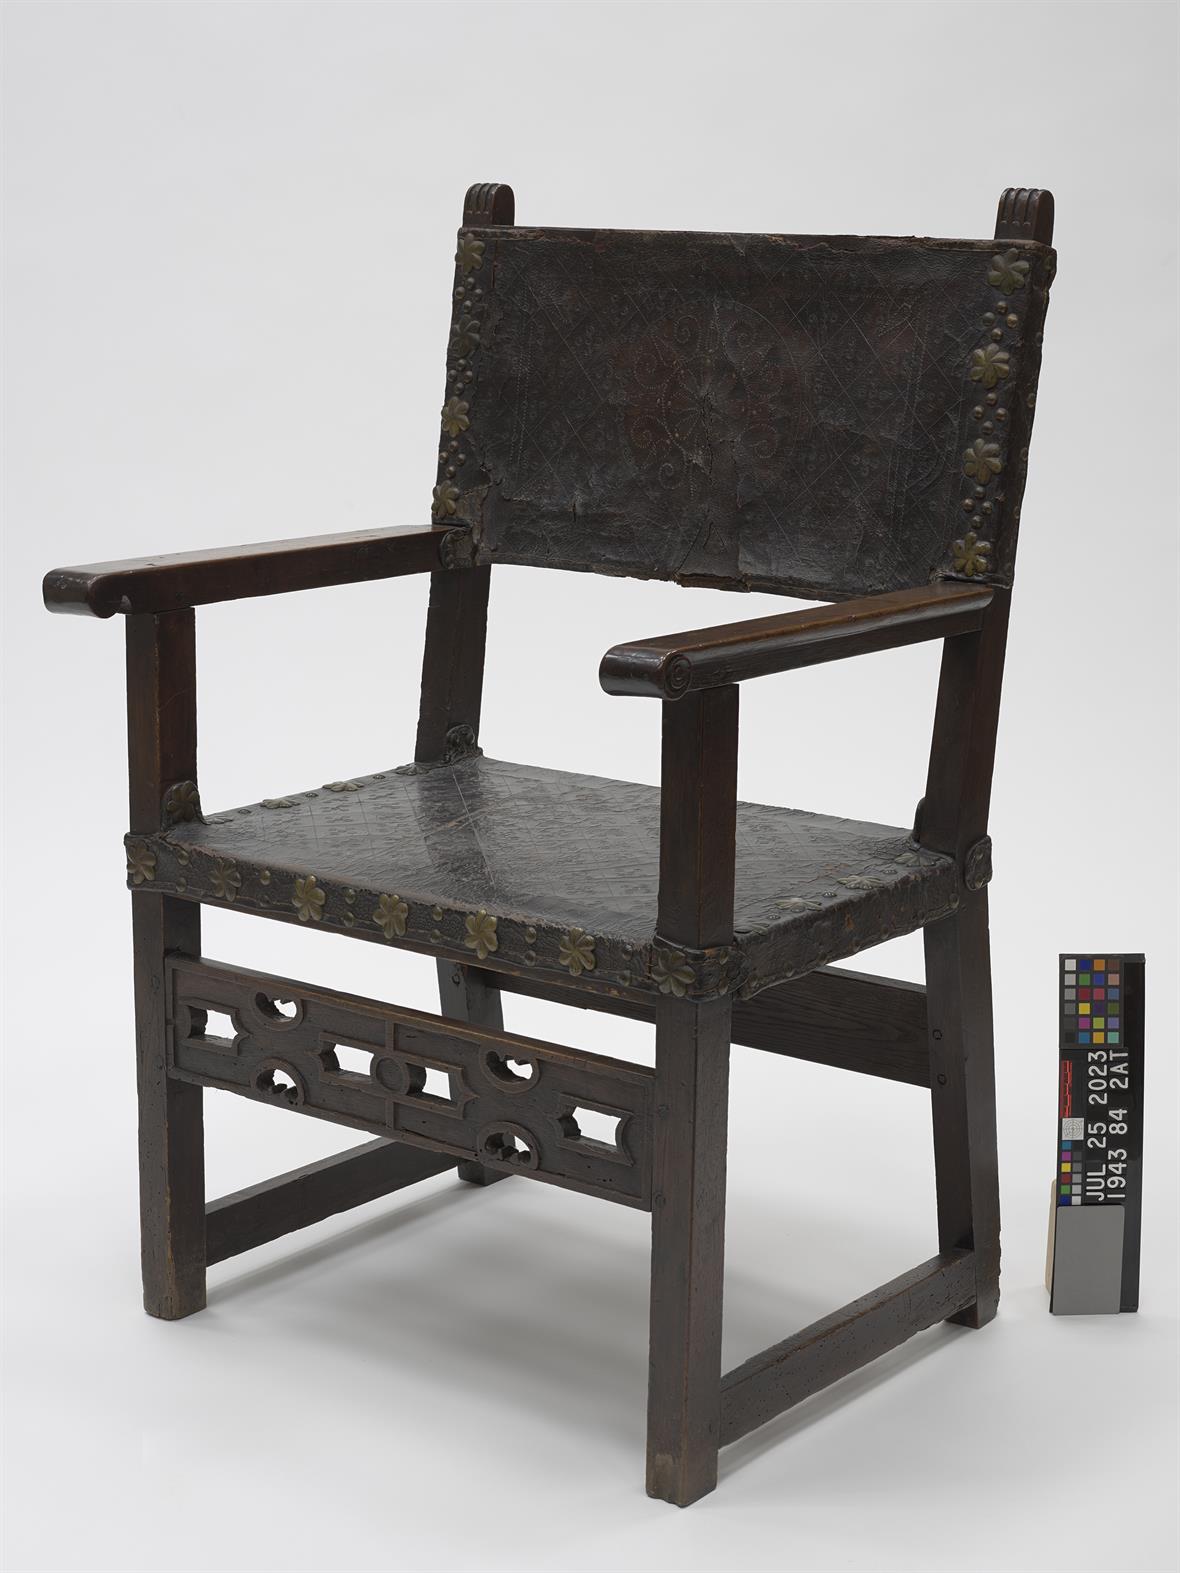 Museum documentation image of a wooden chair with aged leather upholstery.